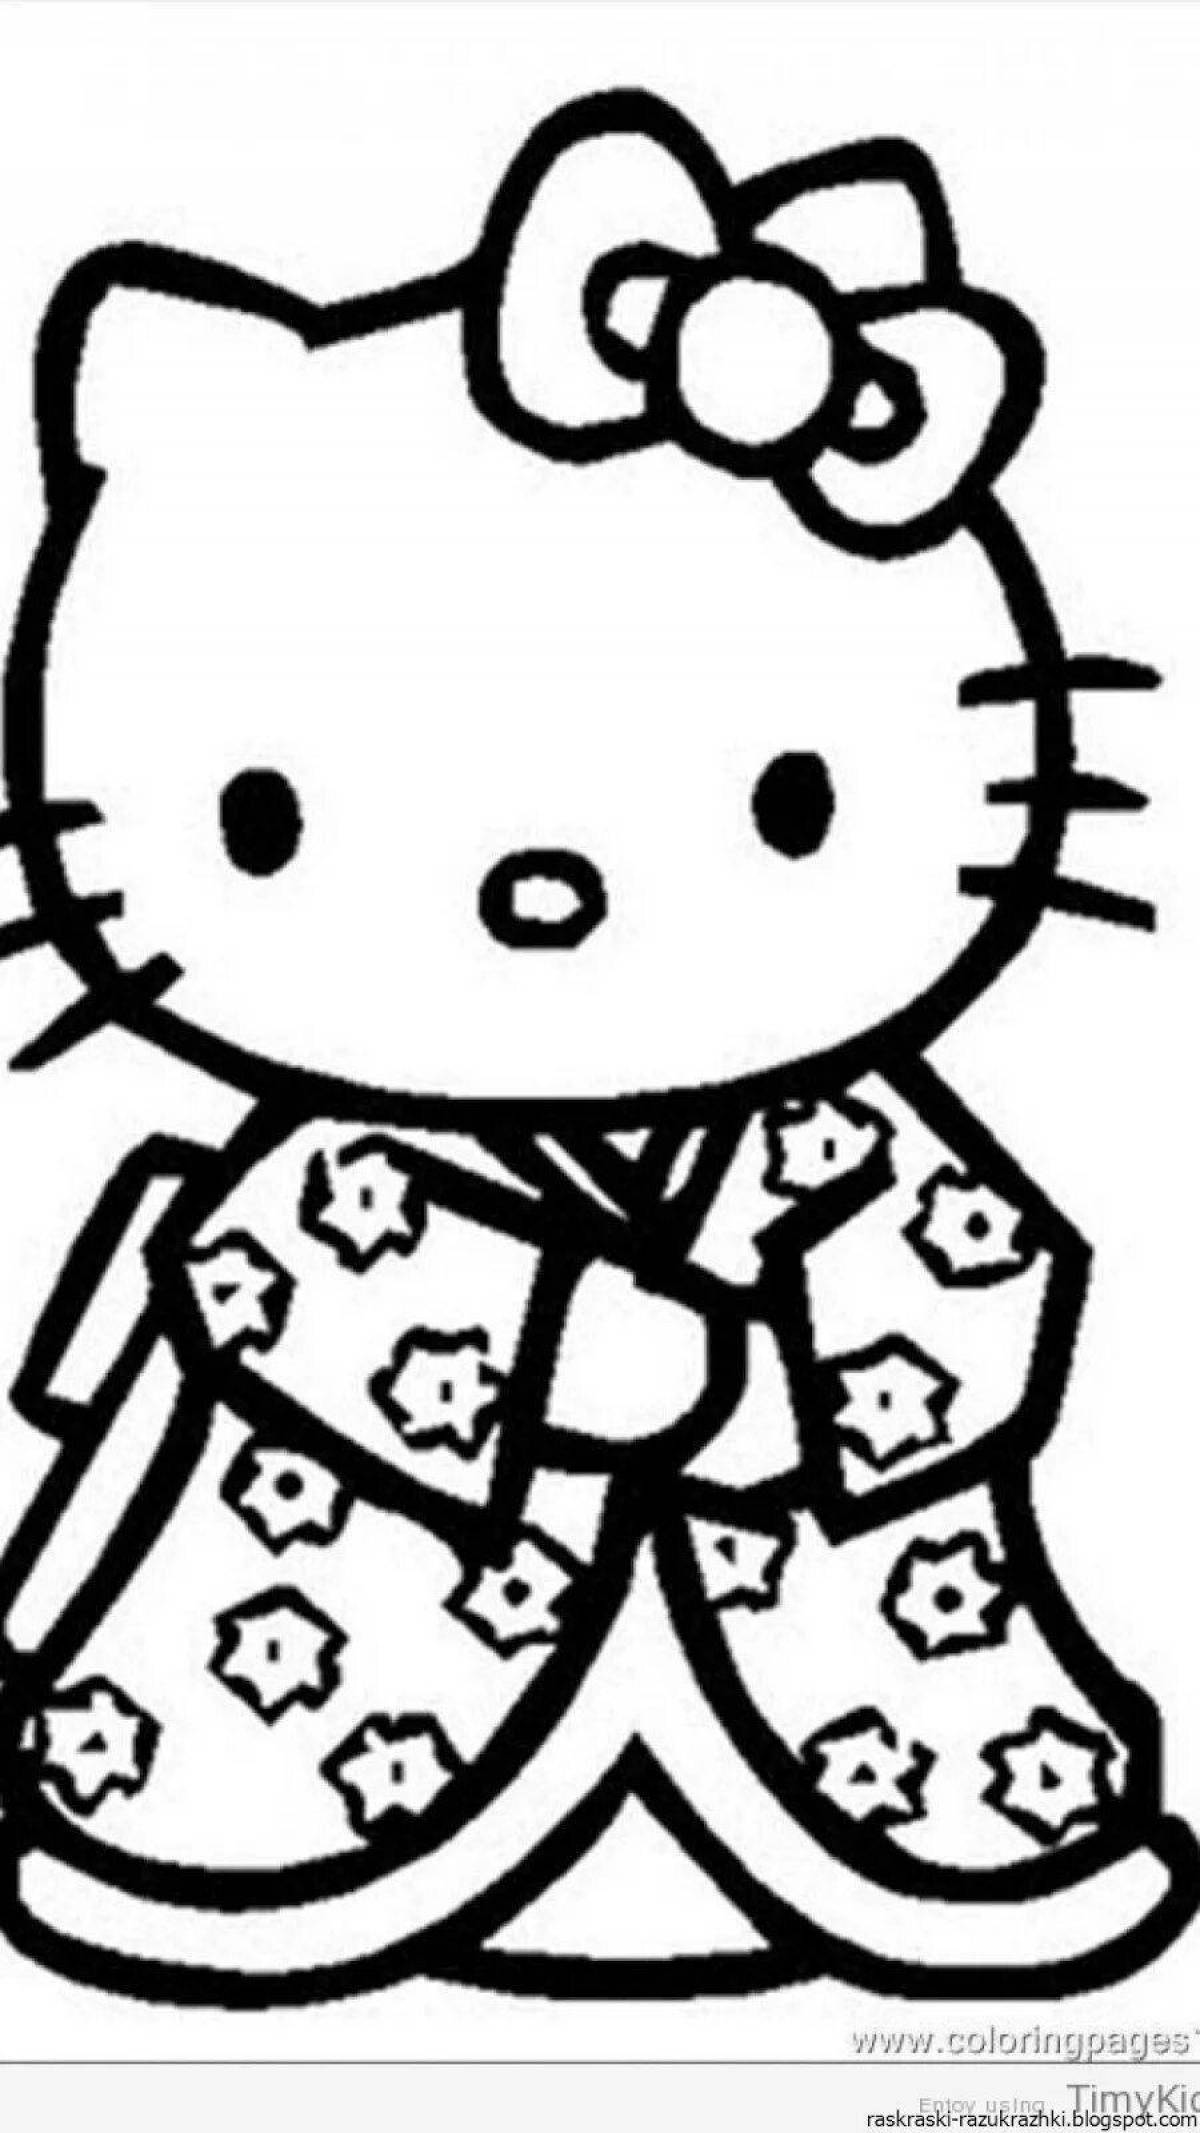 Rave hello kitty anime coloring book